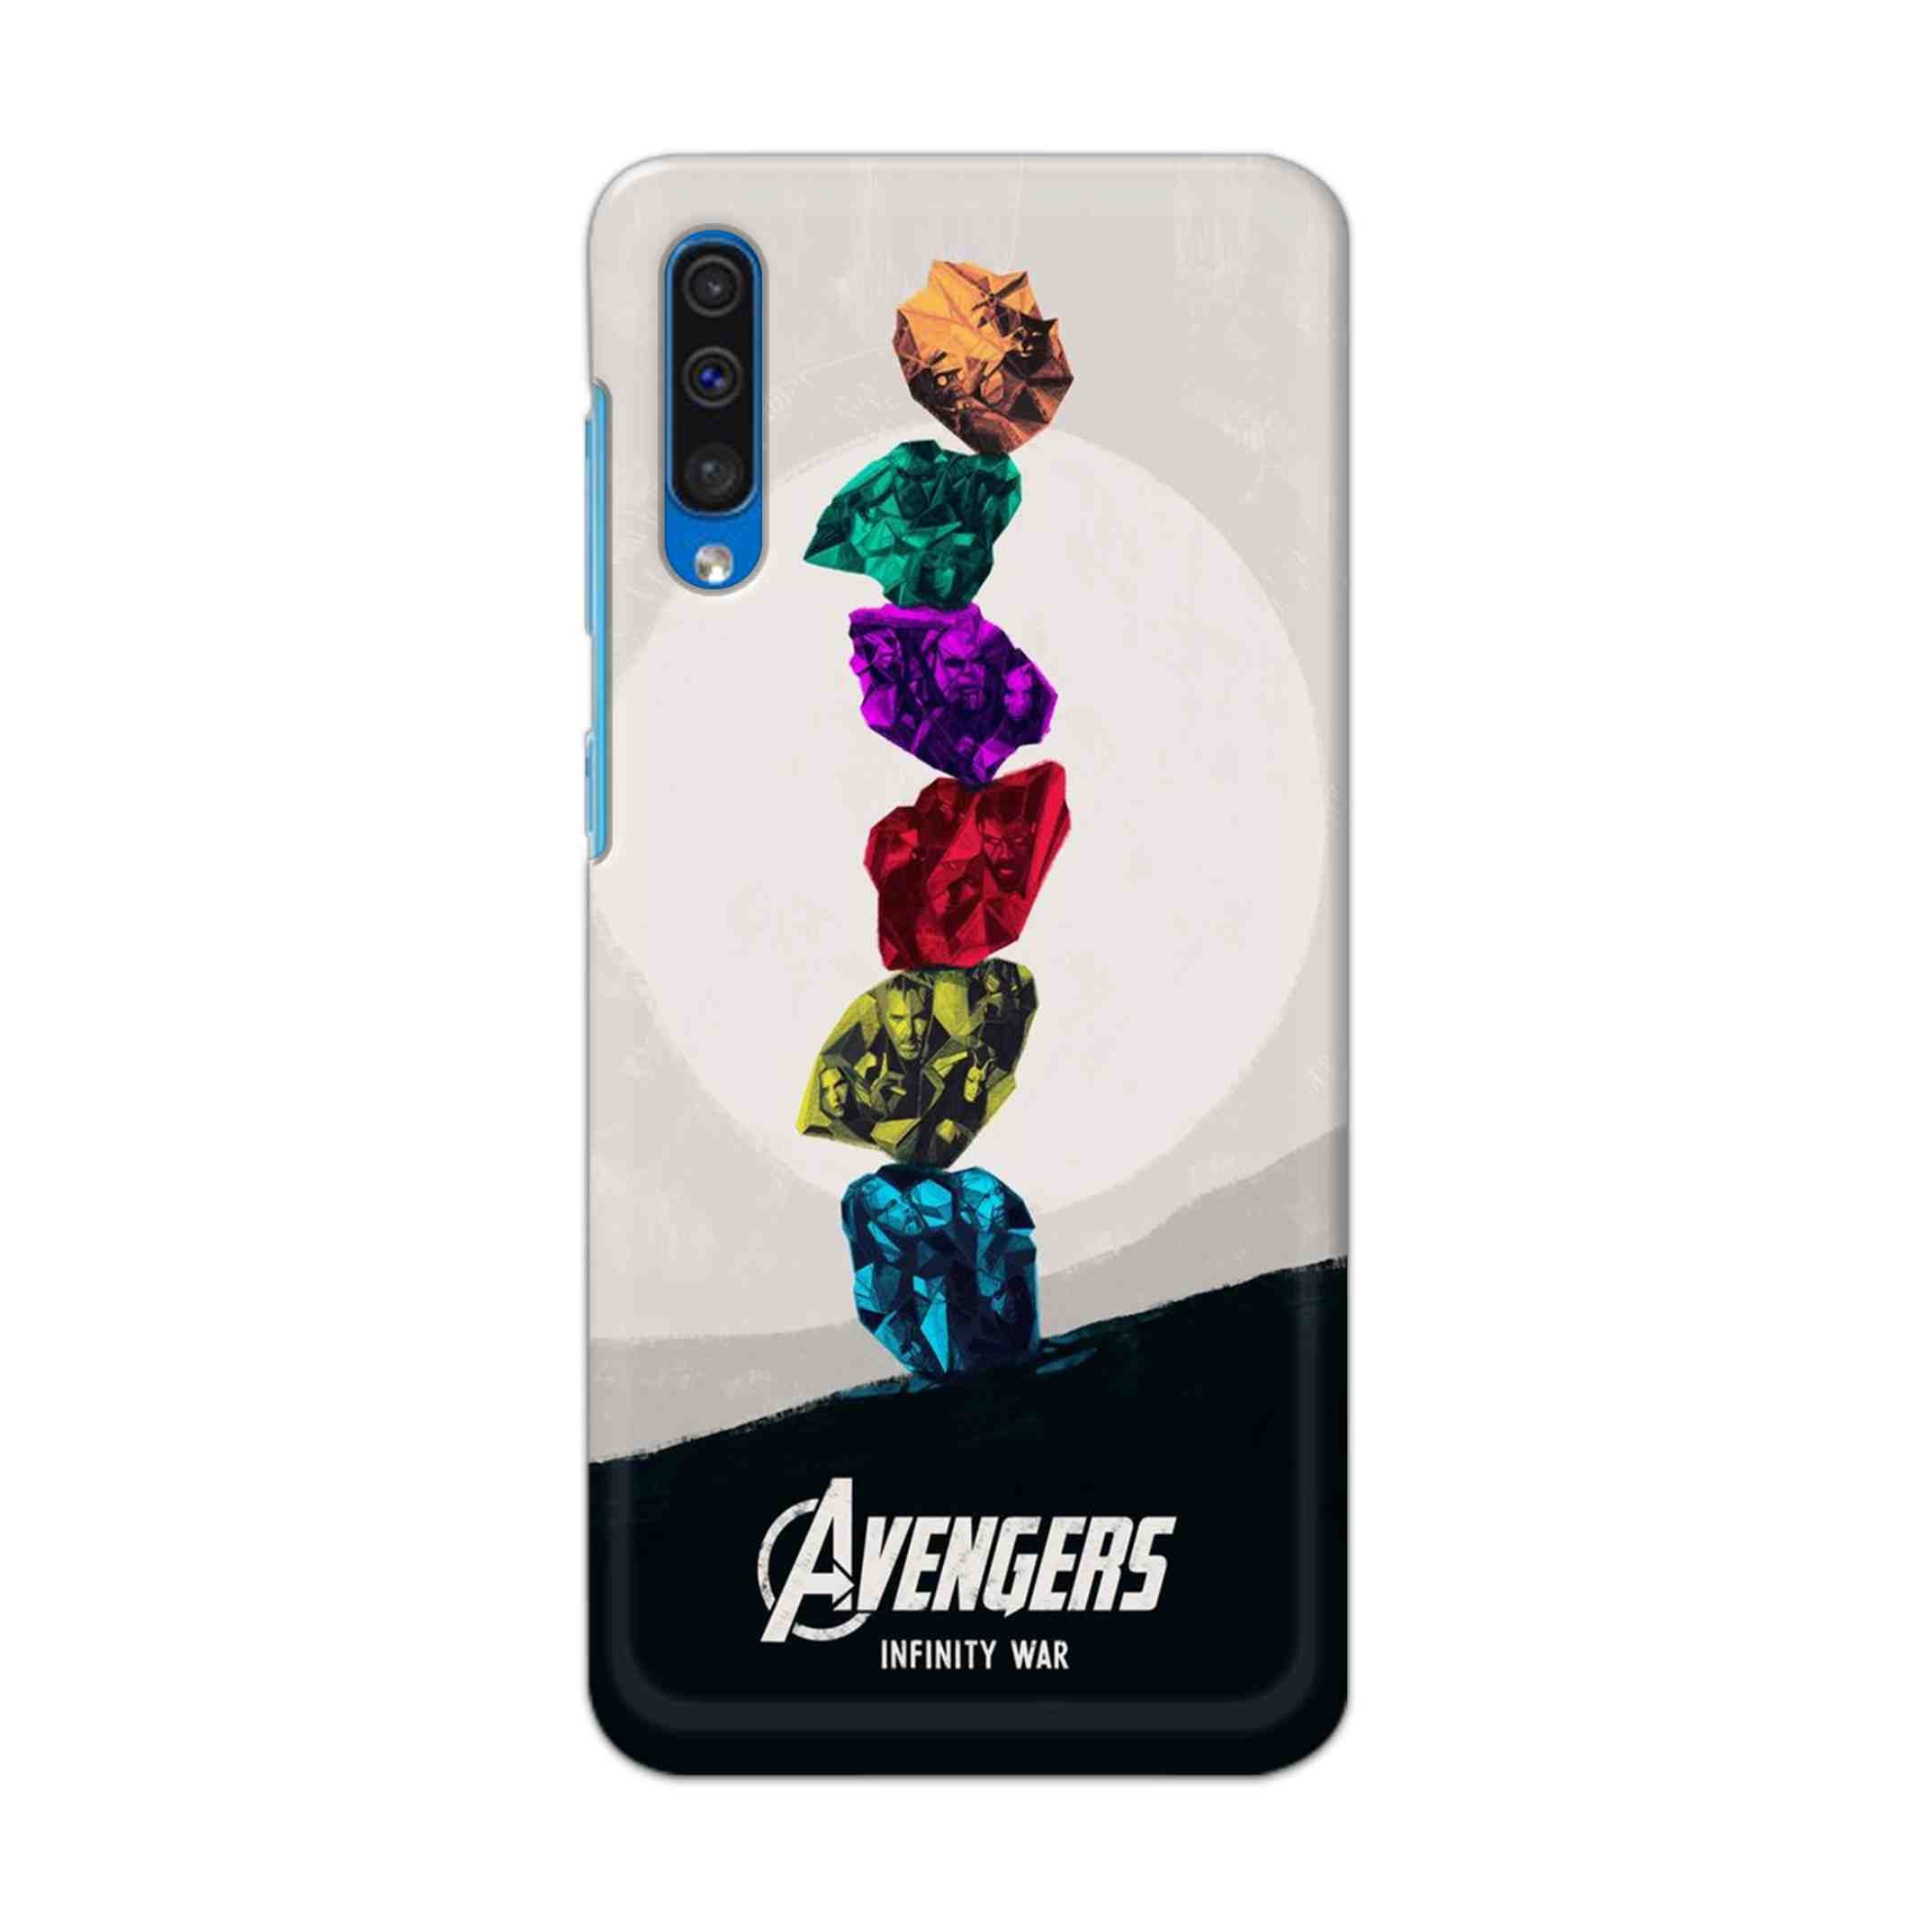 Buy Avengers Stone Hard Back Mobile Phone Case Cover For Samsung Galaxy A50 / A50s / A30s Online